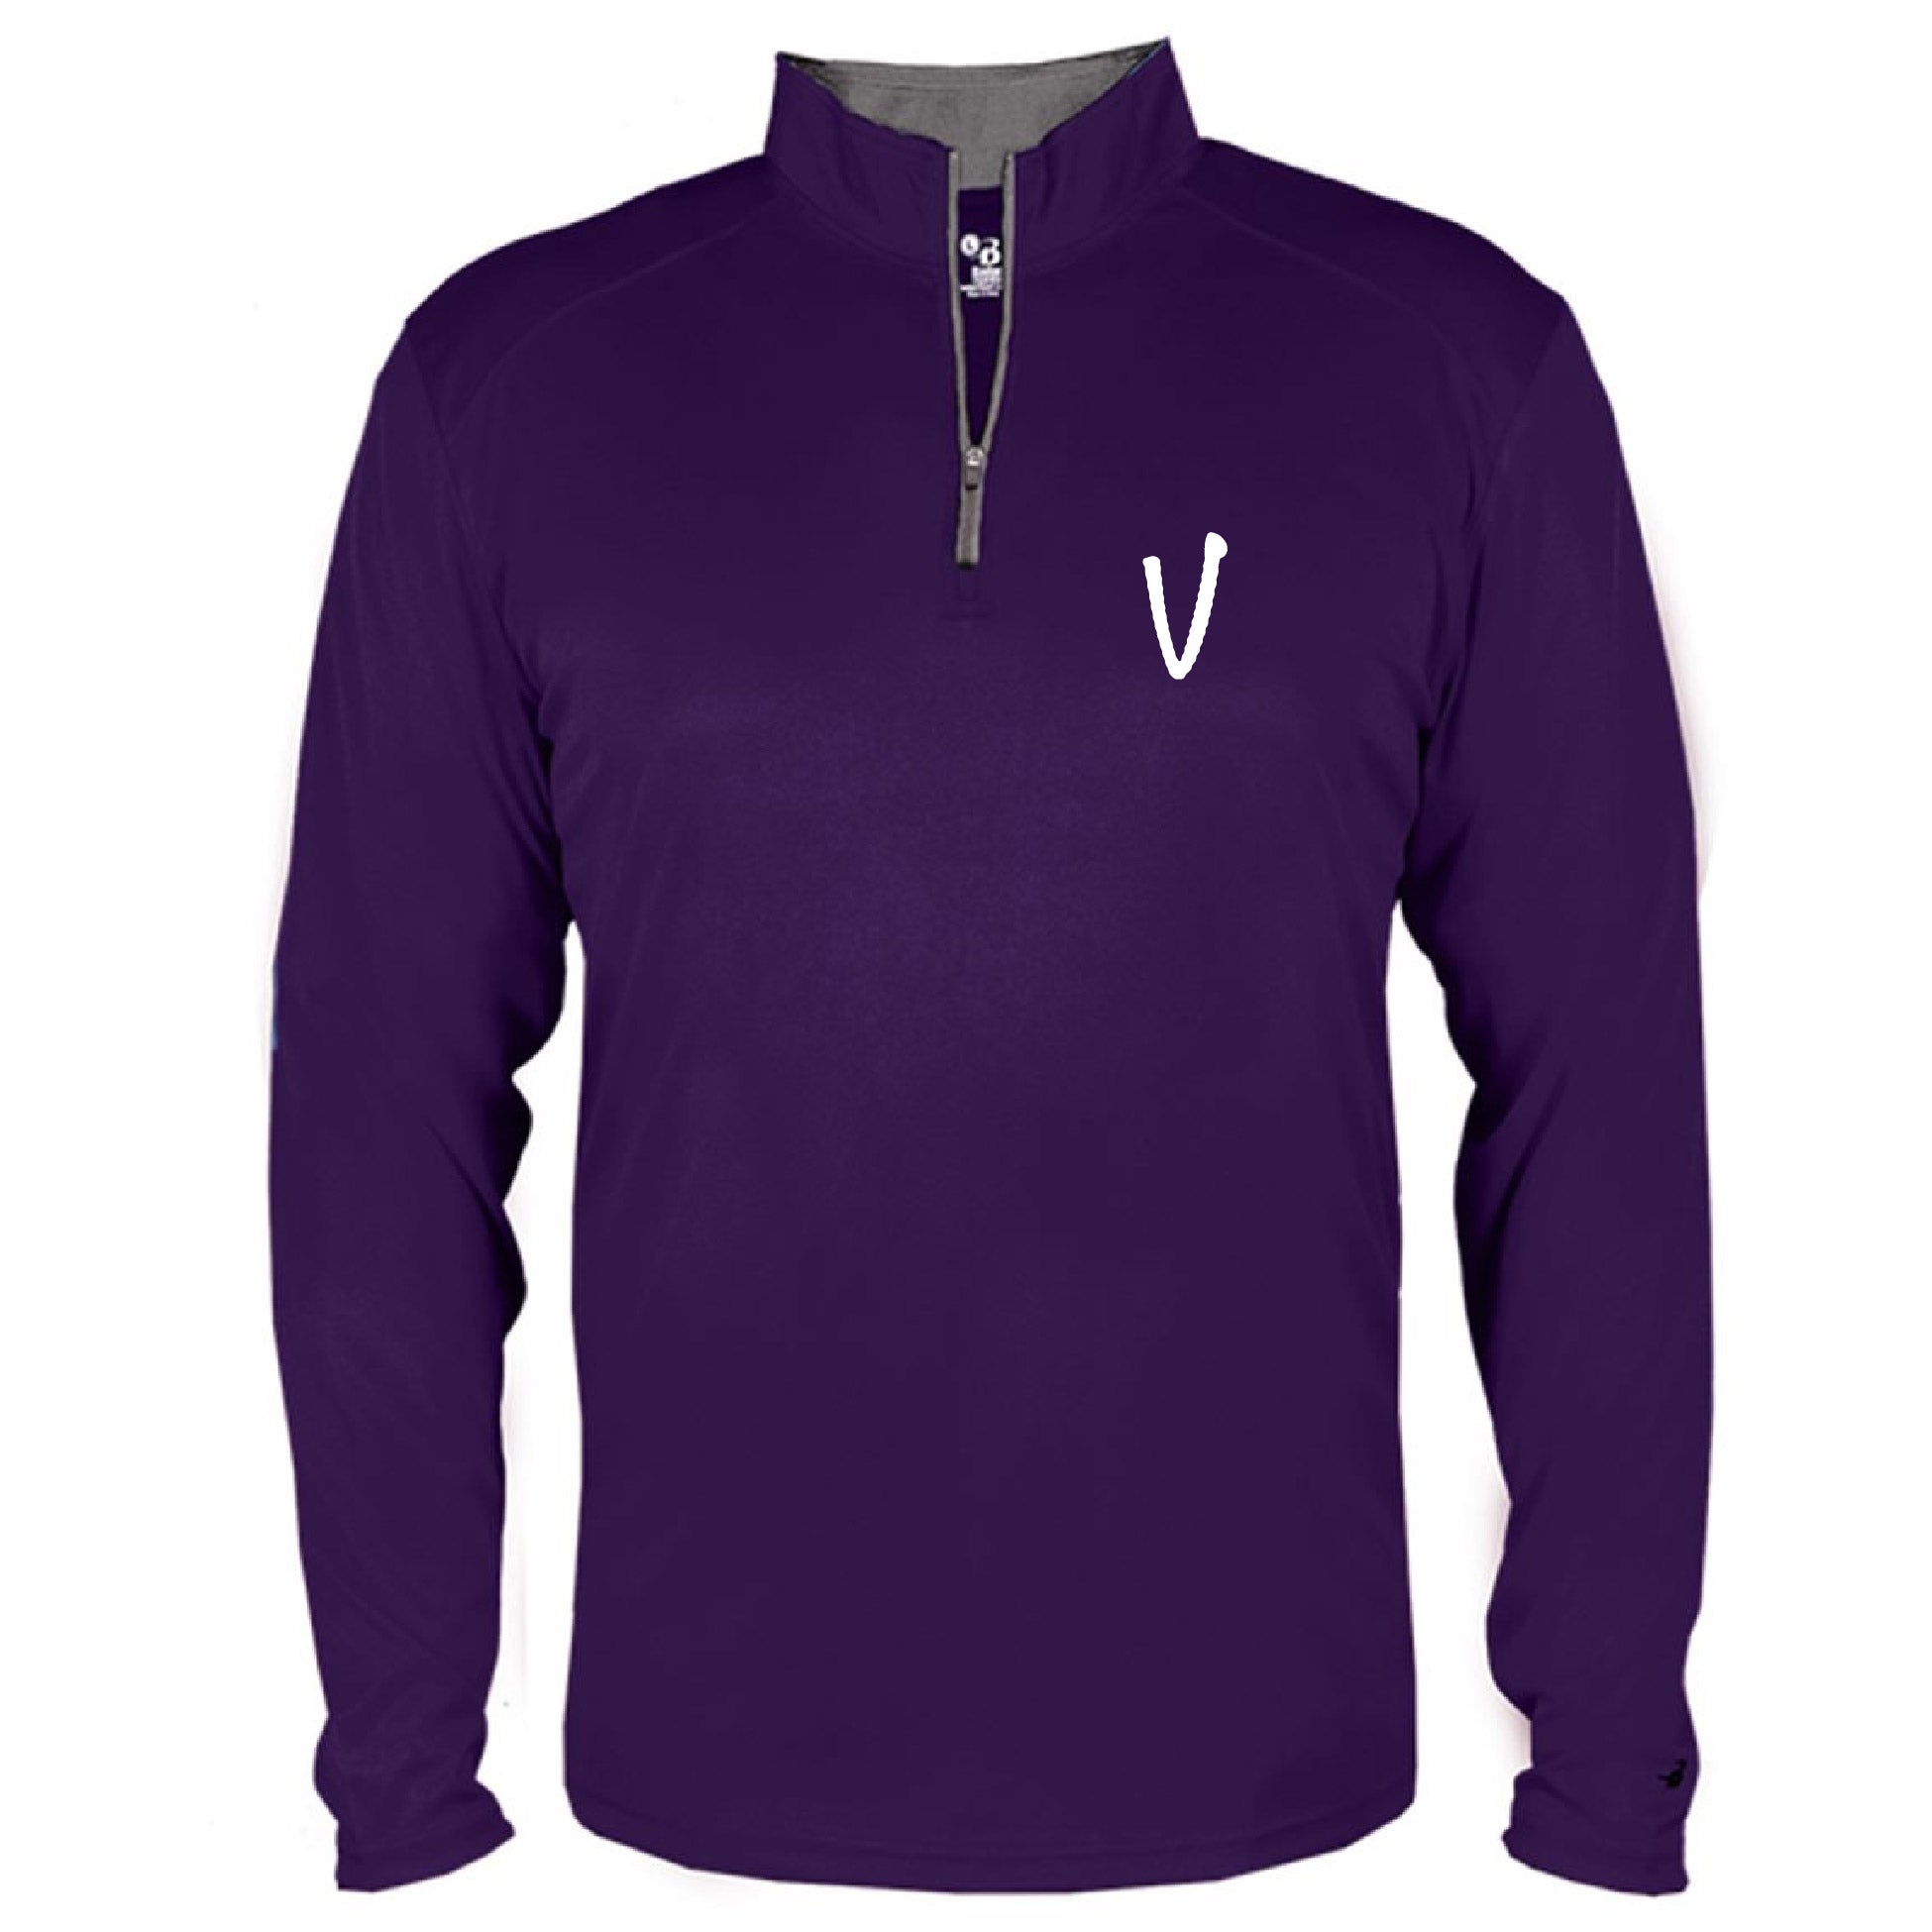 VIBE 1/4-Zip Pullover